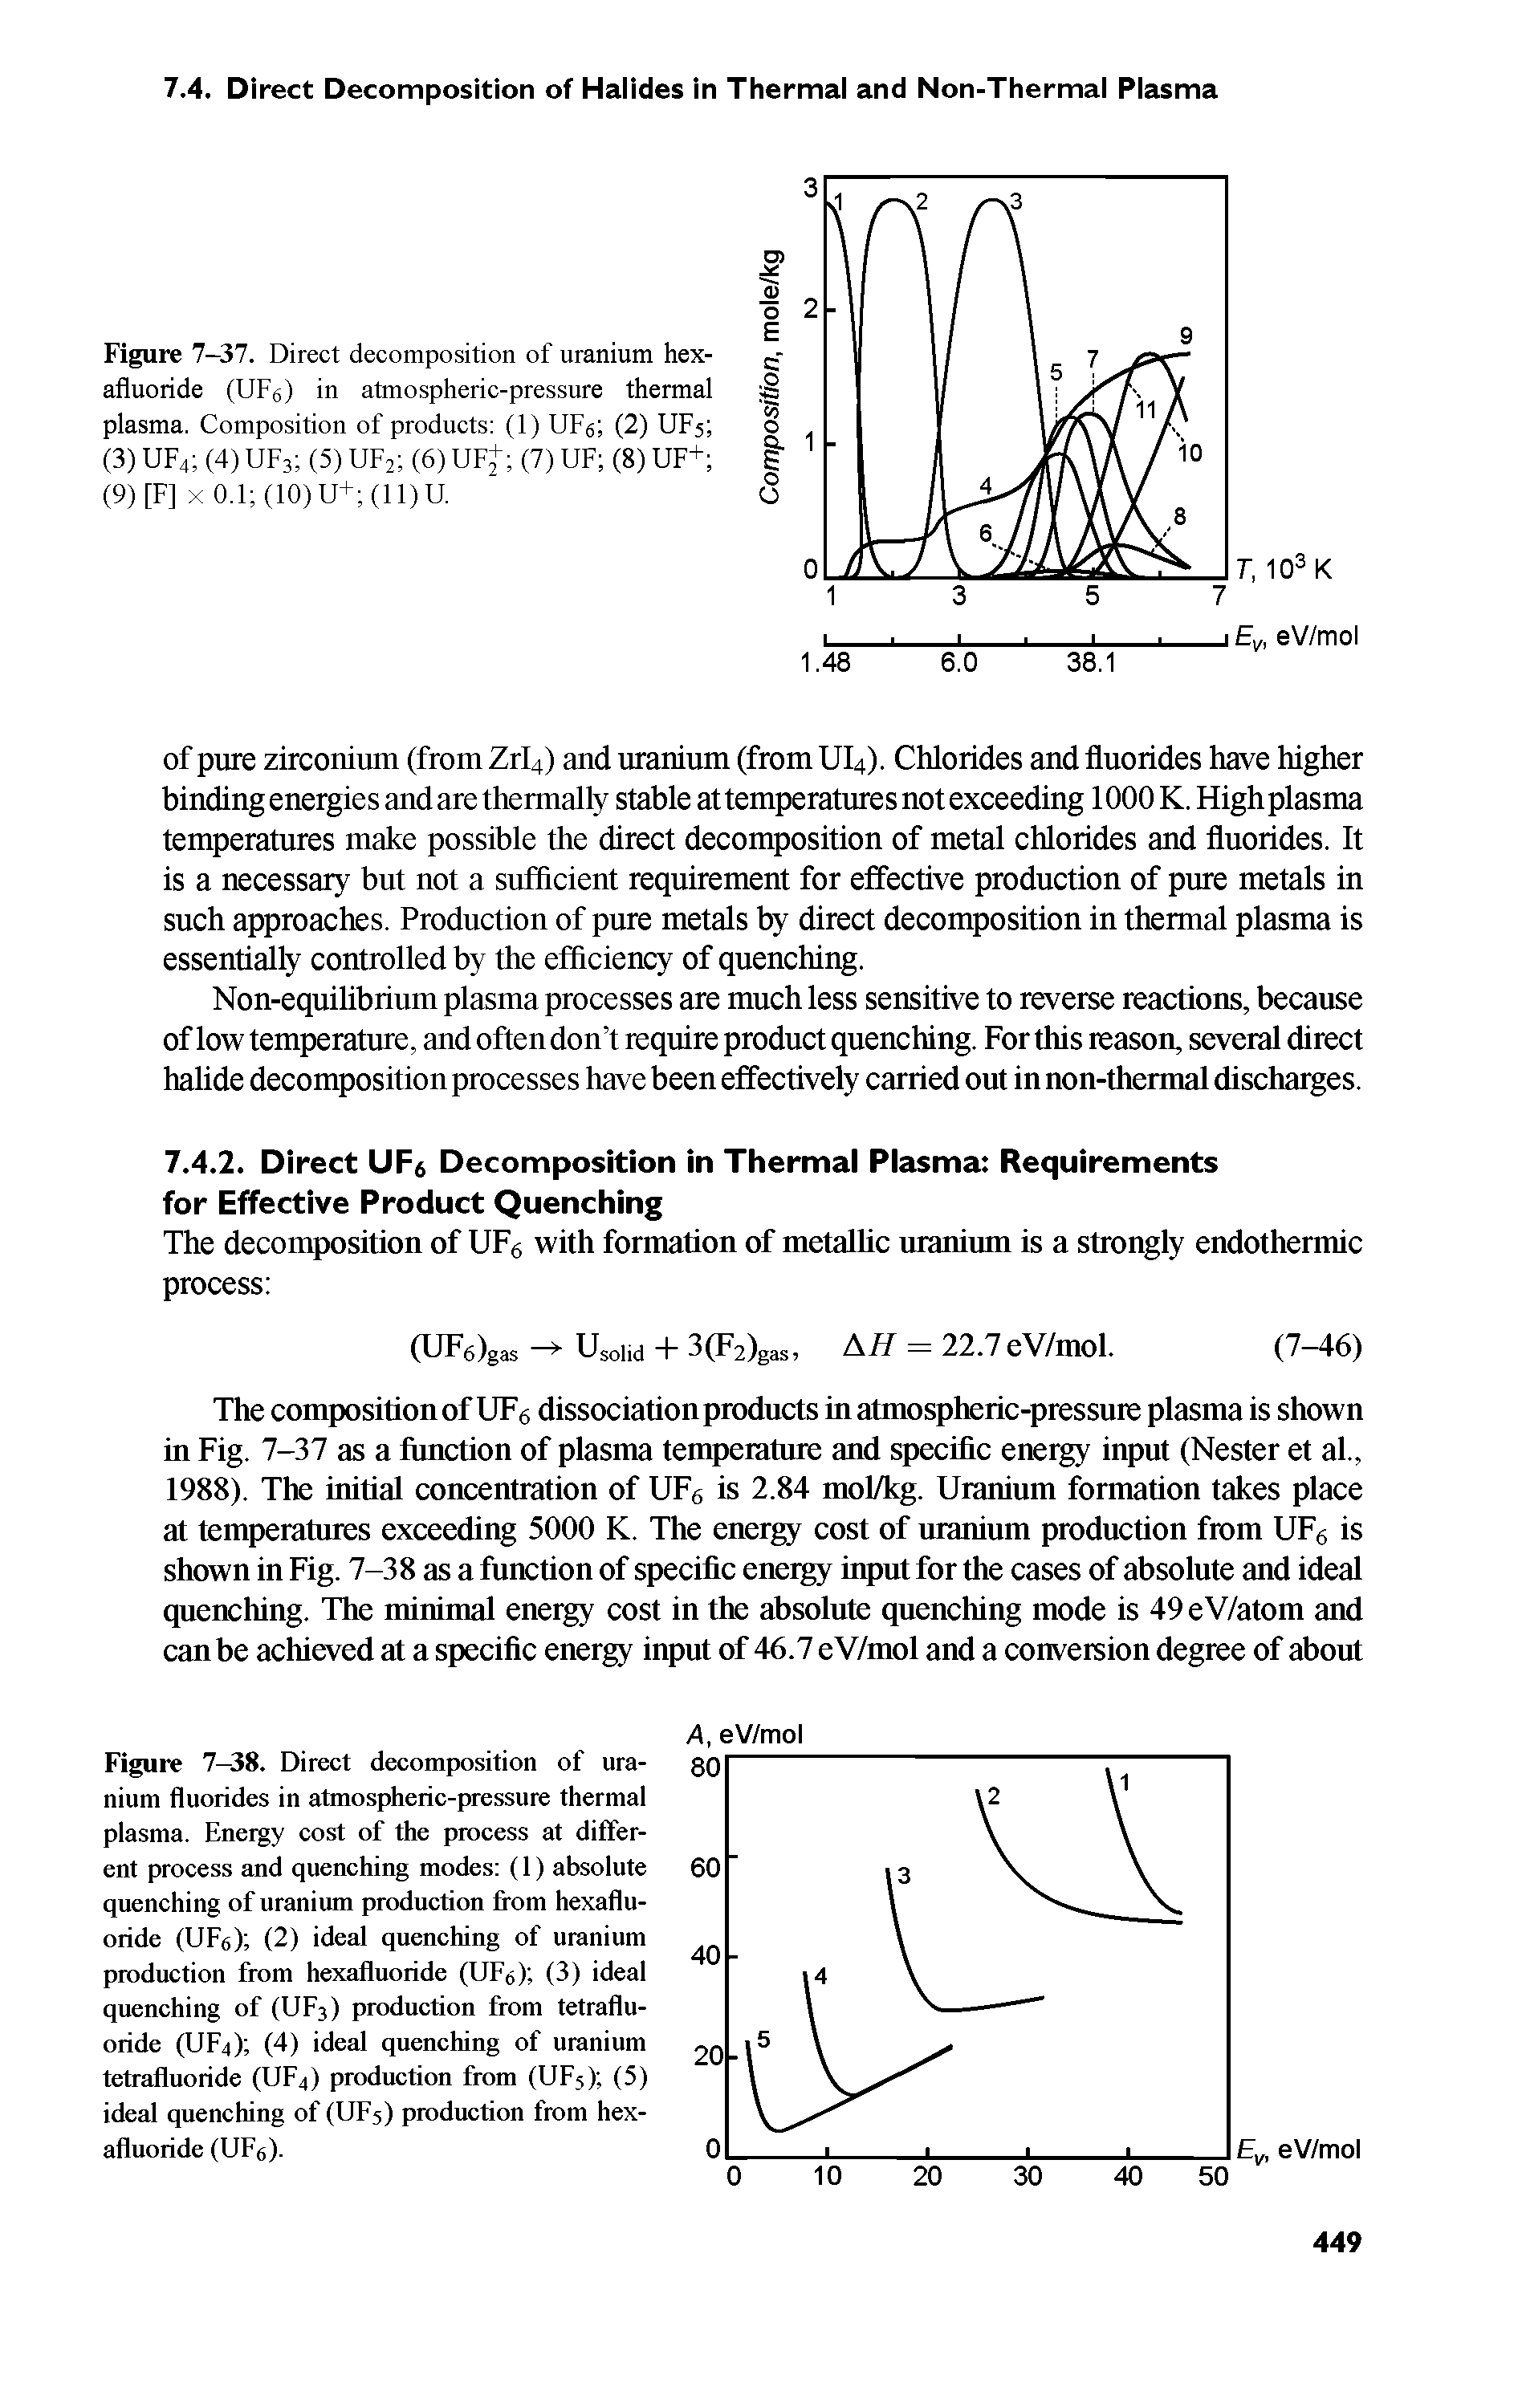 Figure 7—38. Direct decomposition of uranium fluorides in atmospheric-pressure thermal plasma. Energy cost of the process at different process and quenching modes (1) absolute quenching of uranium production from hexafluoride (UFe) (2) ideal quenching of uranium production from hexafluoride (UFo) (3) ideal quenching of (UF3) production from tetraflu-oride (UF4) (4) ideal quenching of uranium tetrafluoride (UF4) production from (UF5) (5) ideal quenching of (UF5) production from hexafluoride (UFe).